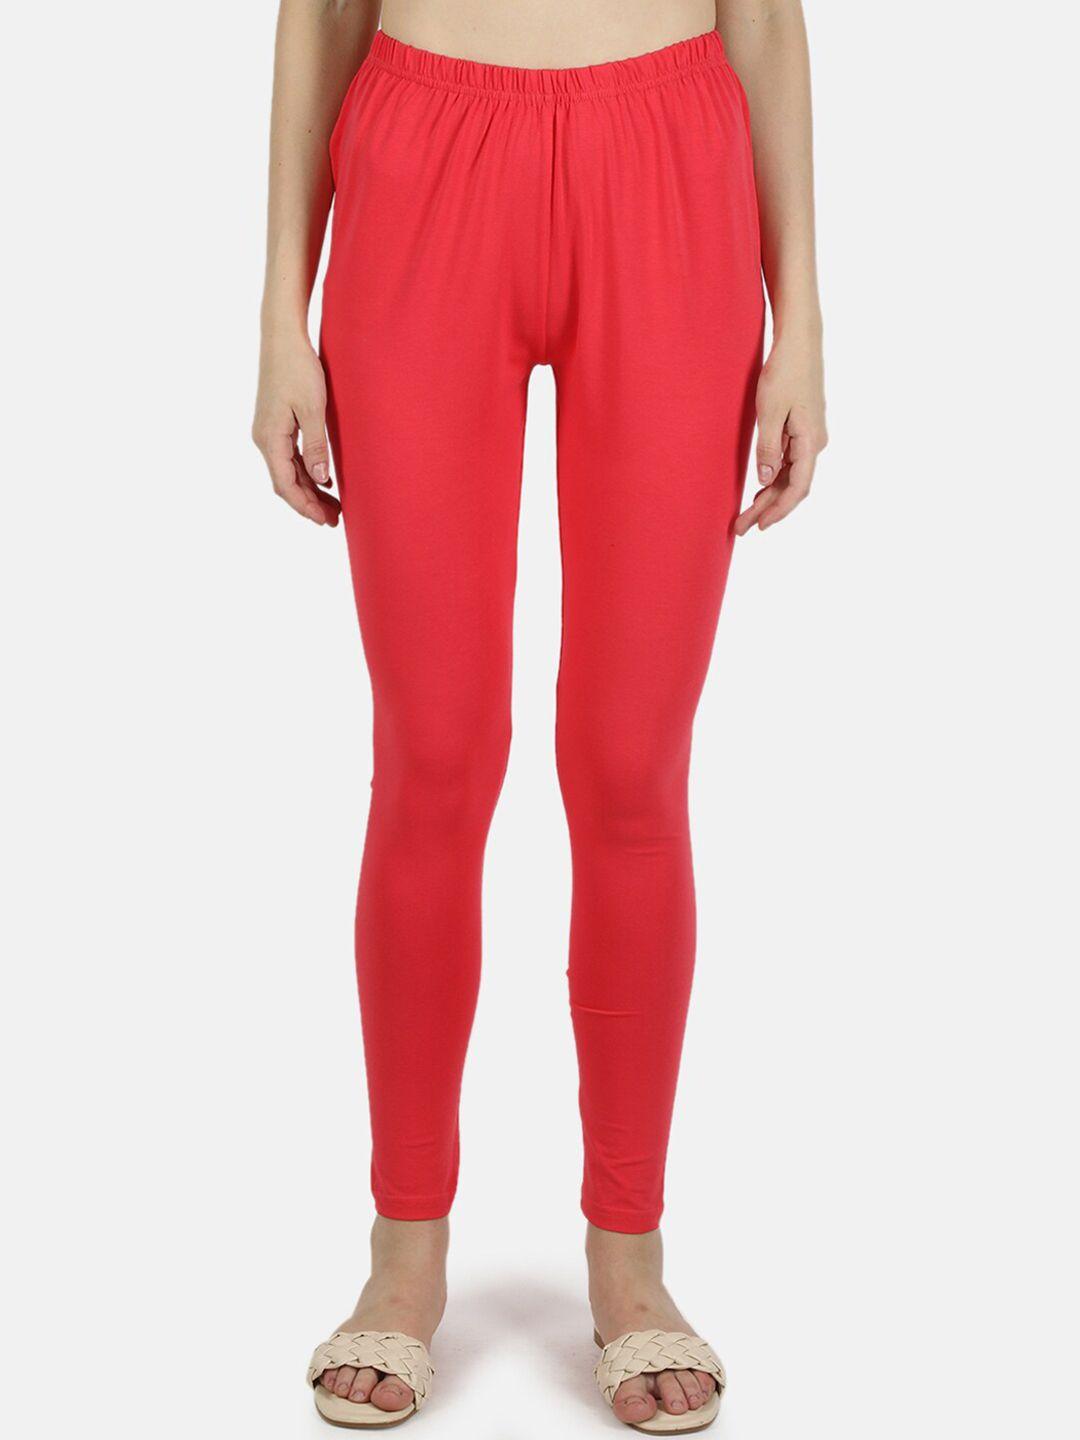 monte-carlo-women-coral-pink-solid-ankle-length-leggings